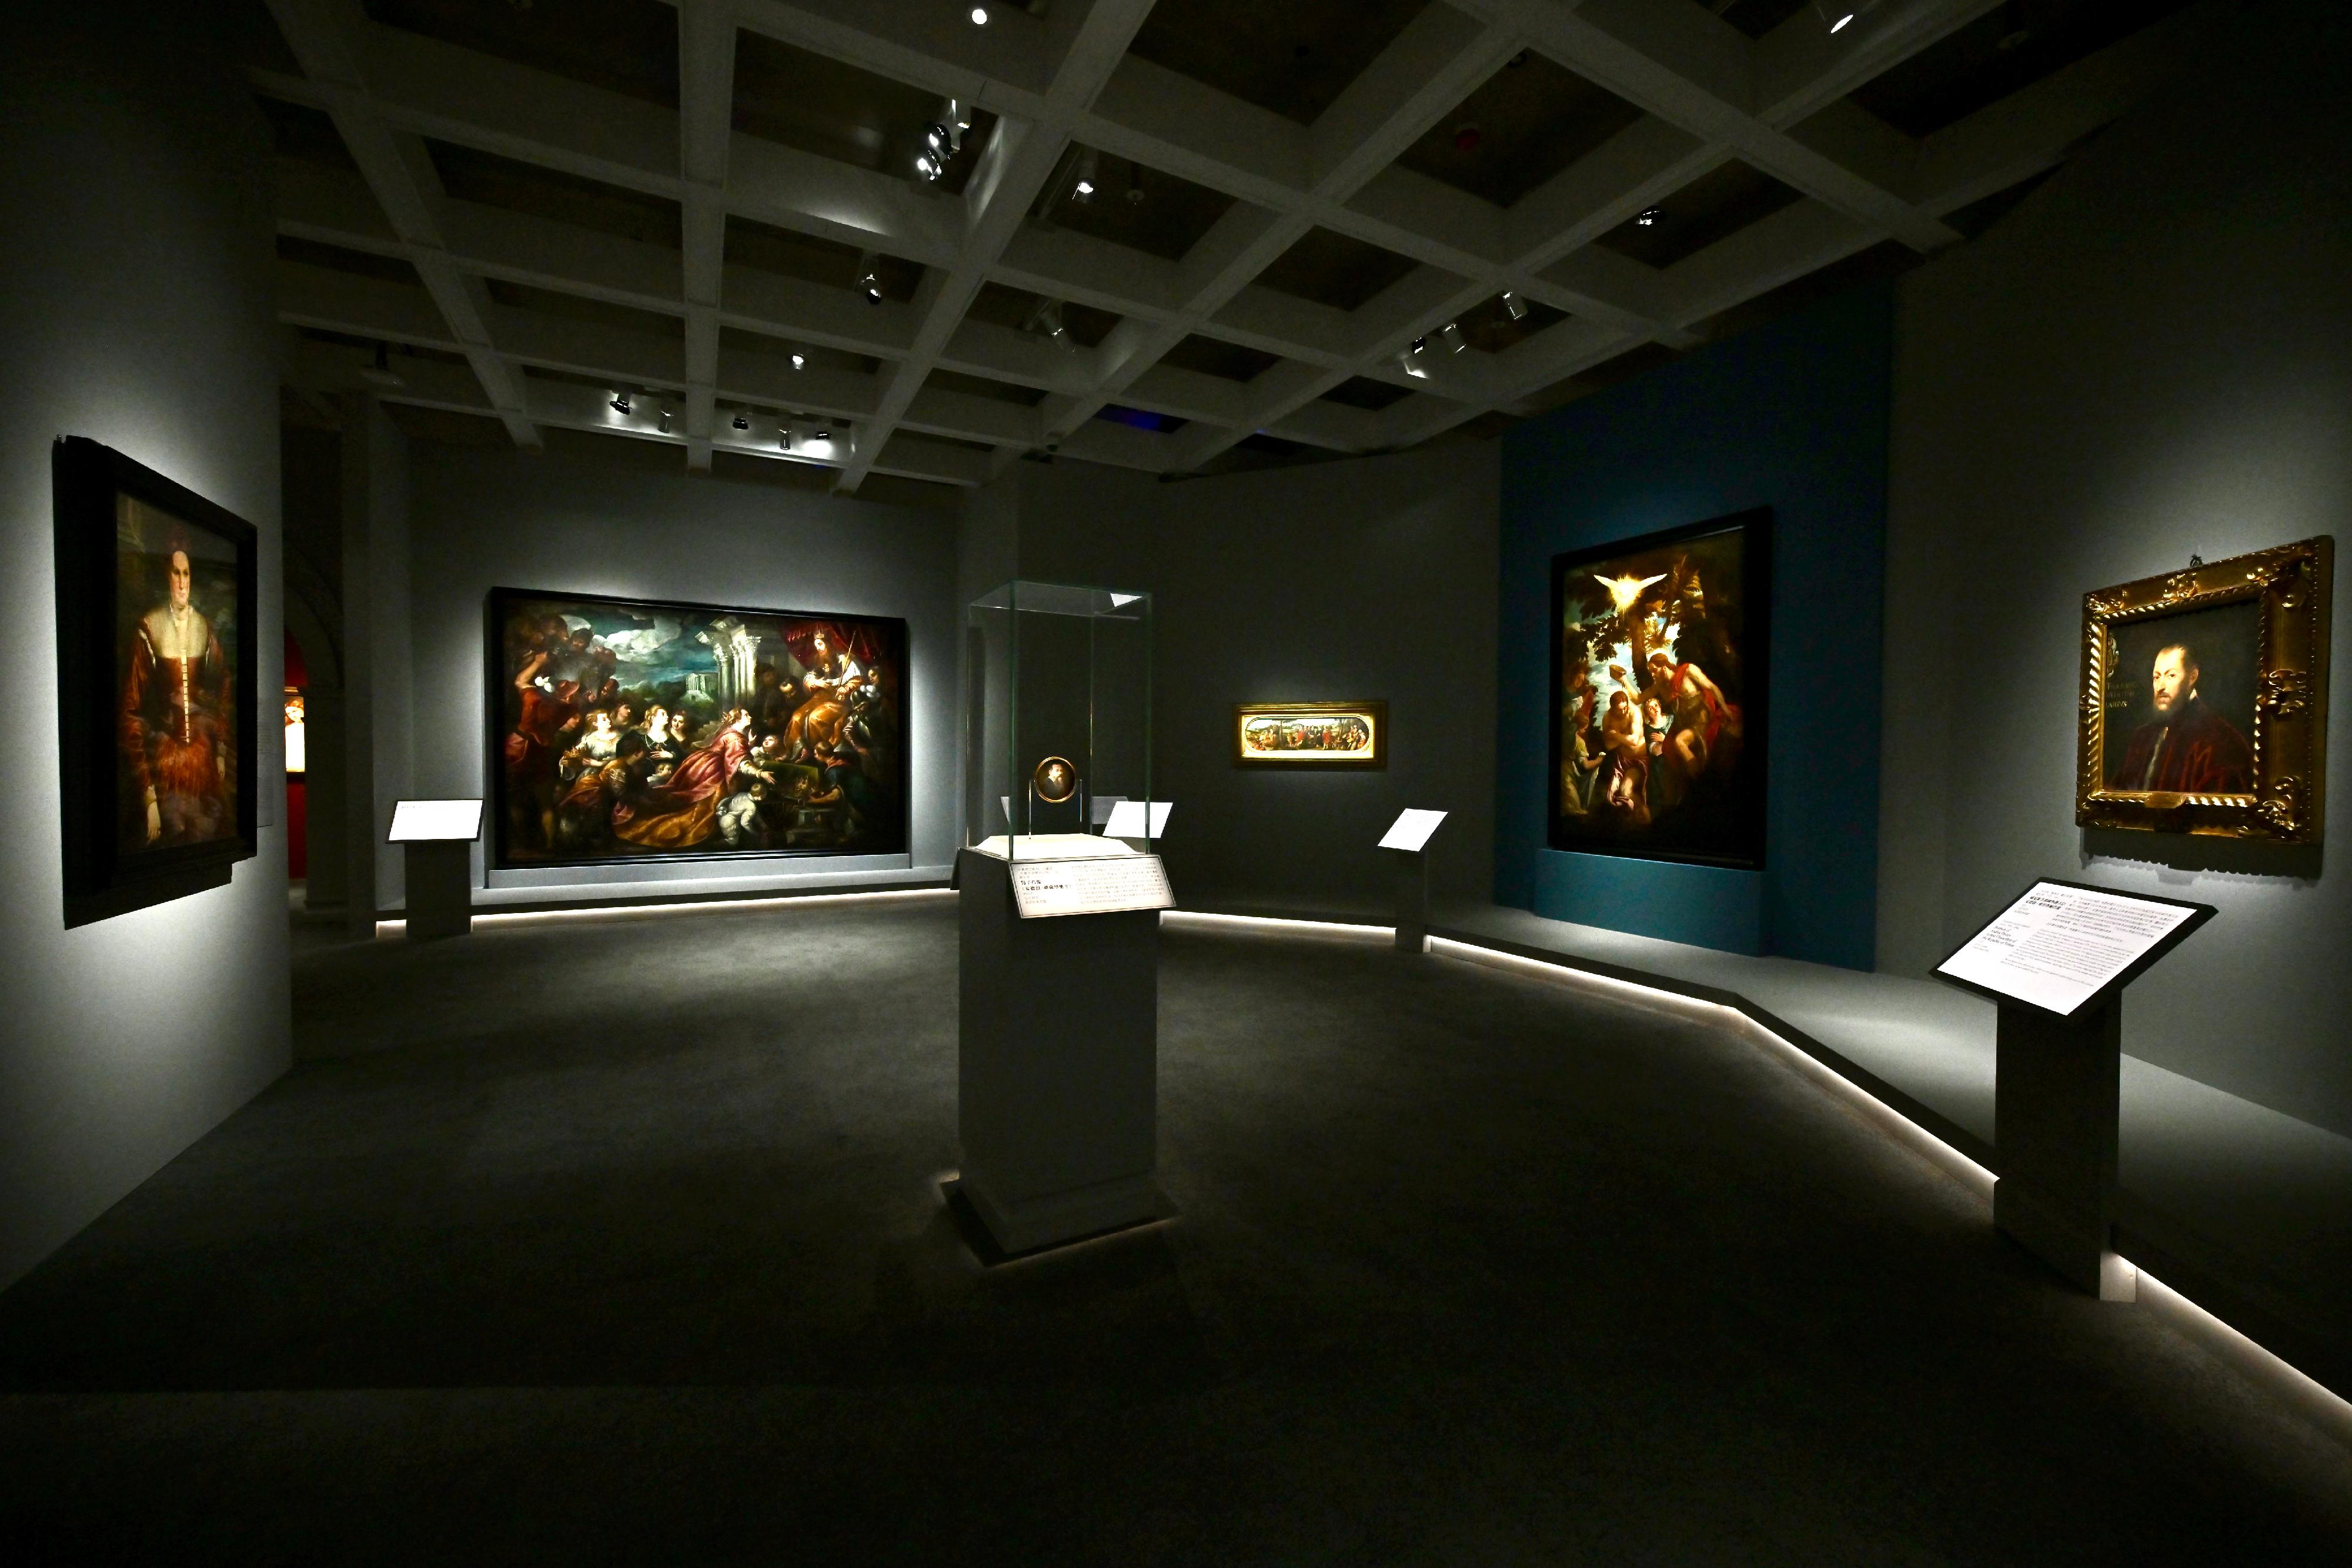 "The Hong Kong Jockey Club Series: Titian and the Venetian Renaissance from the Uffizi" exhibition opens to the public at the Hong Kong Museum of Art from today (November 3). The exhibition showcases 50 artworks from collections of the world-renowned Uffizi Galleries in Italy, allowing audiences to explore the painting style of Titian and the masters of the Venetian School.